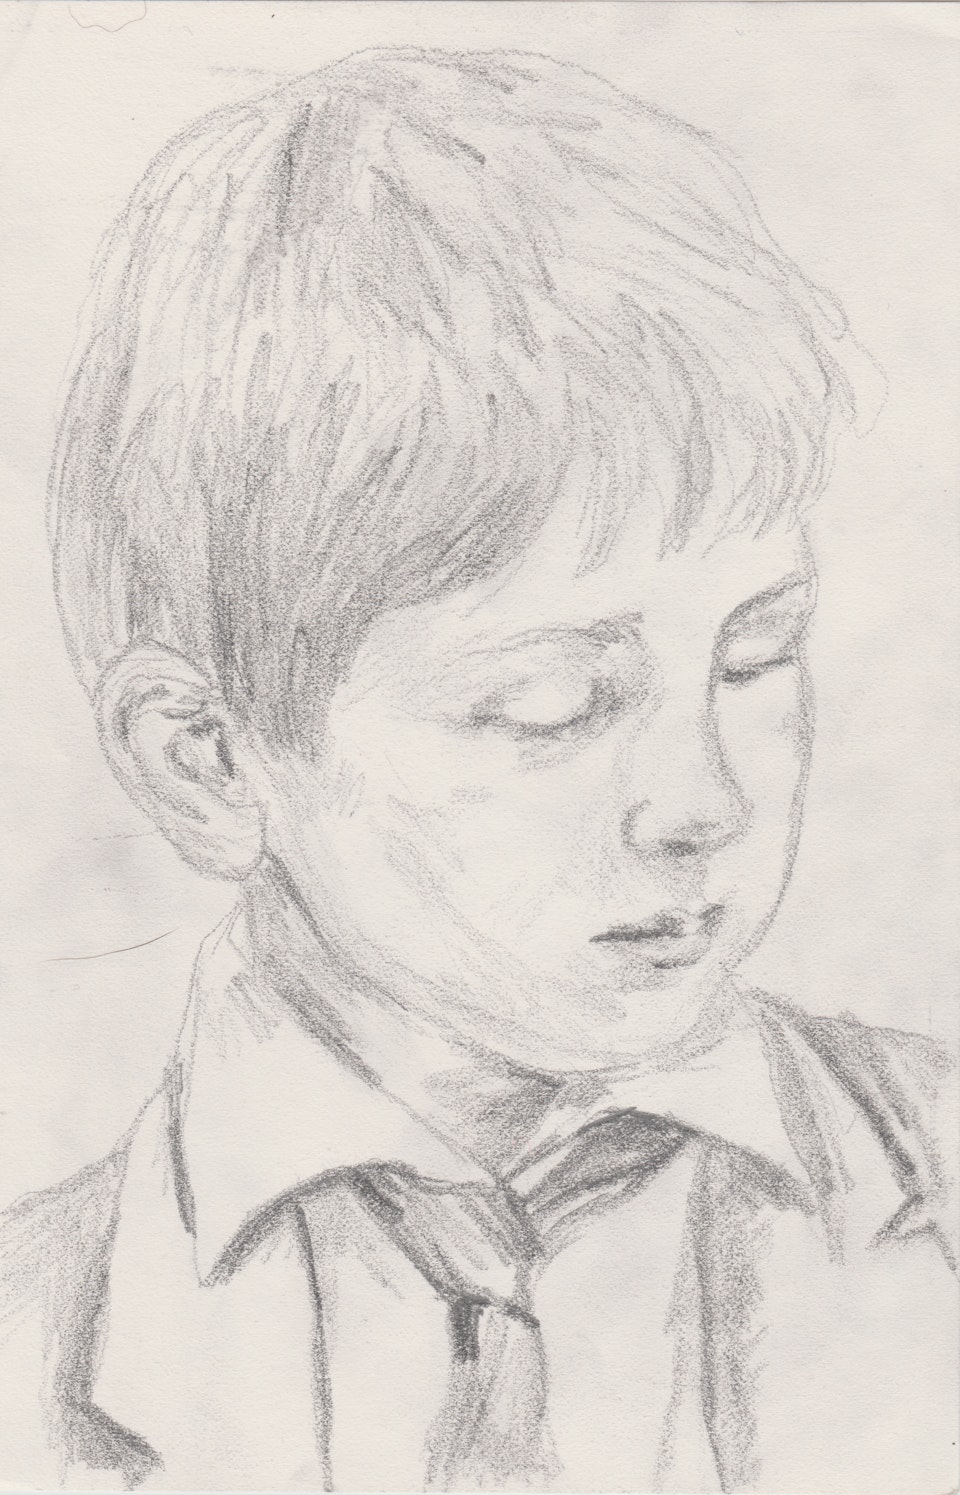 Sketches - Cameron - 2020 - Pencil on Paper - 15 x 21 cm A5